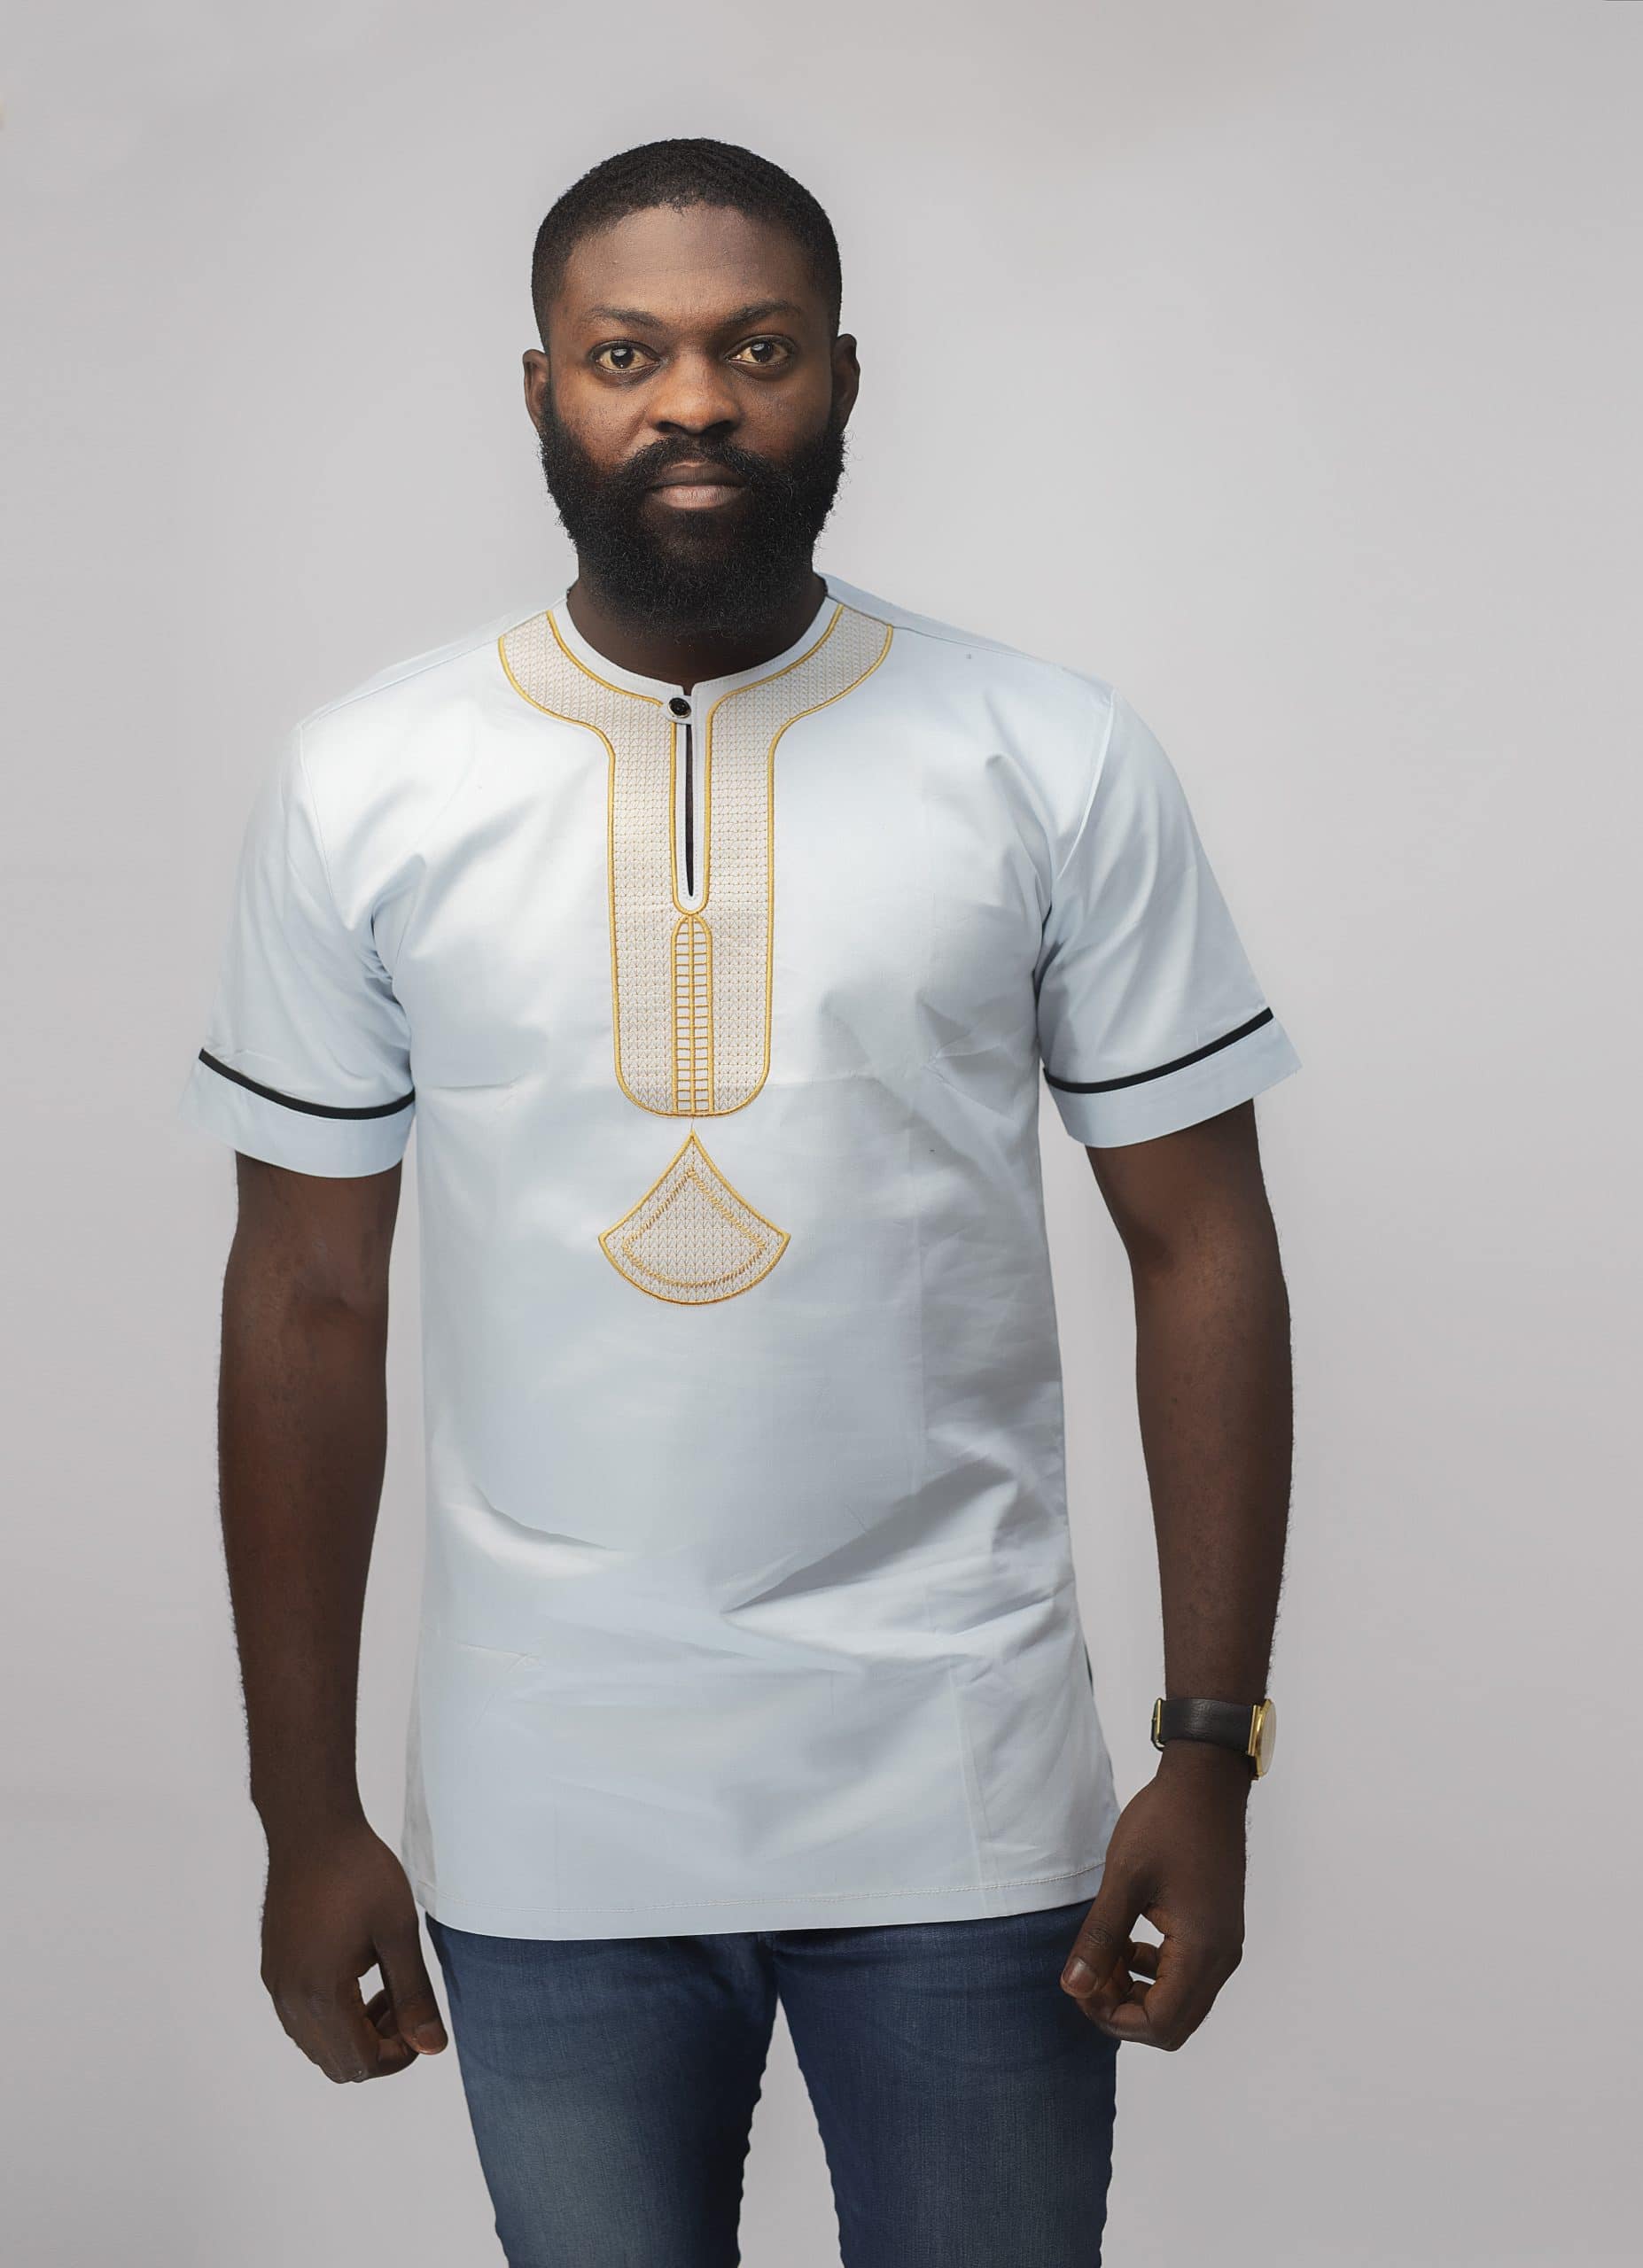 Frontal of model wearing our Mamello Slim Fit Embroidered African Shirt in off-white or pale blue with abstract gold embroidery.